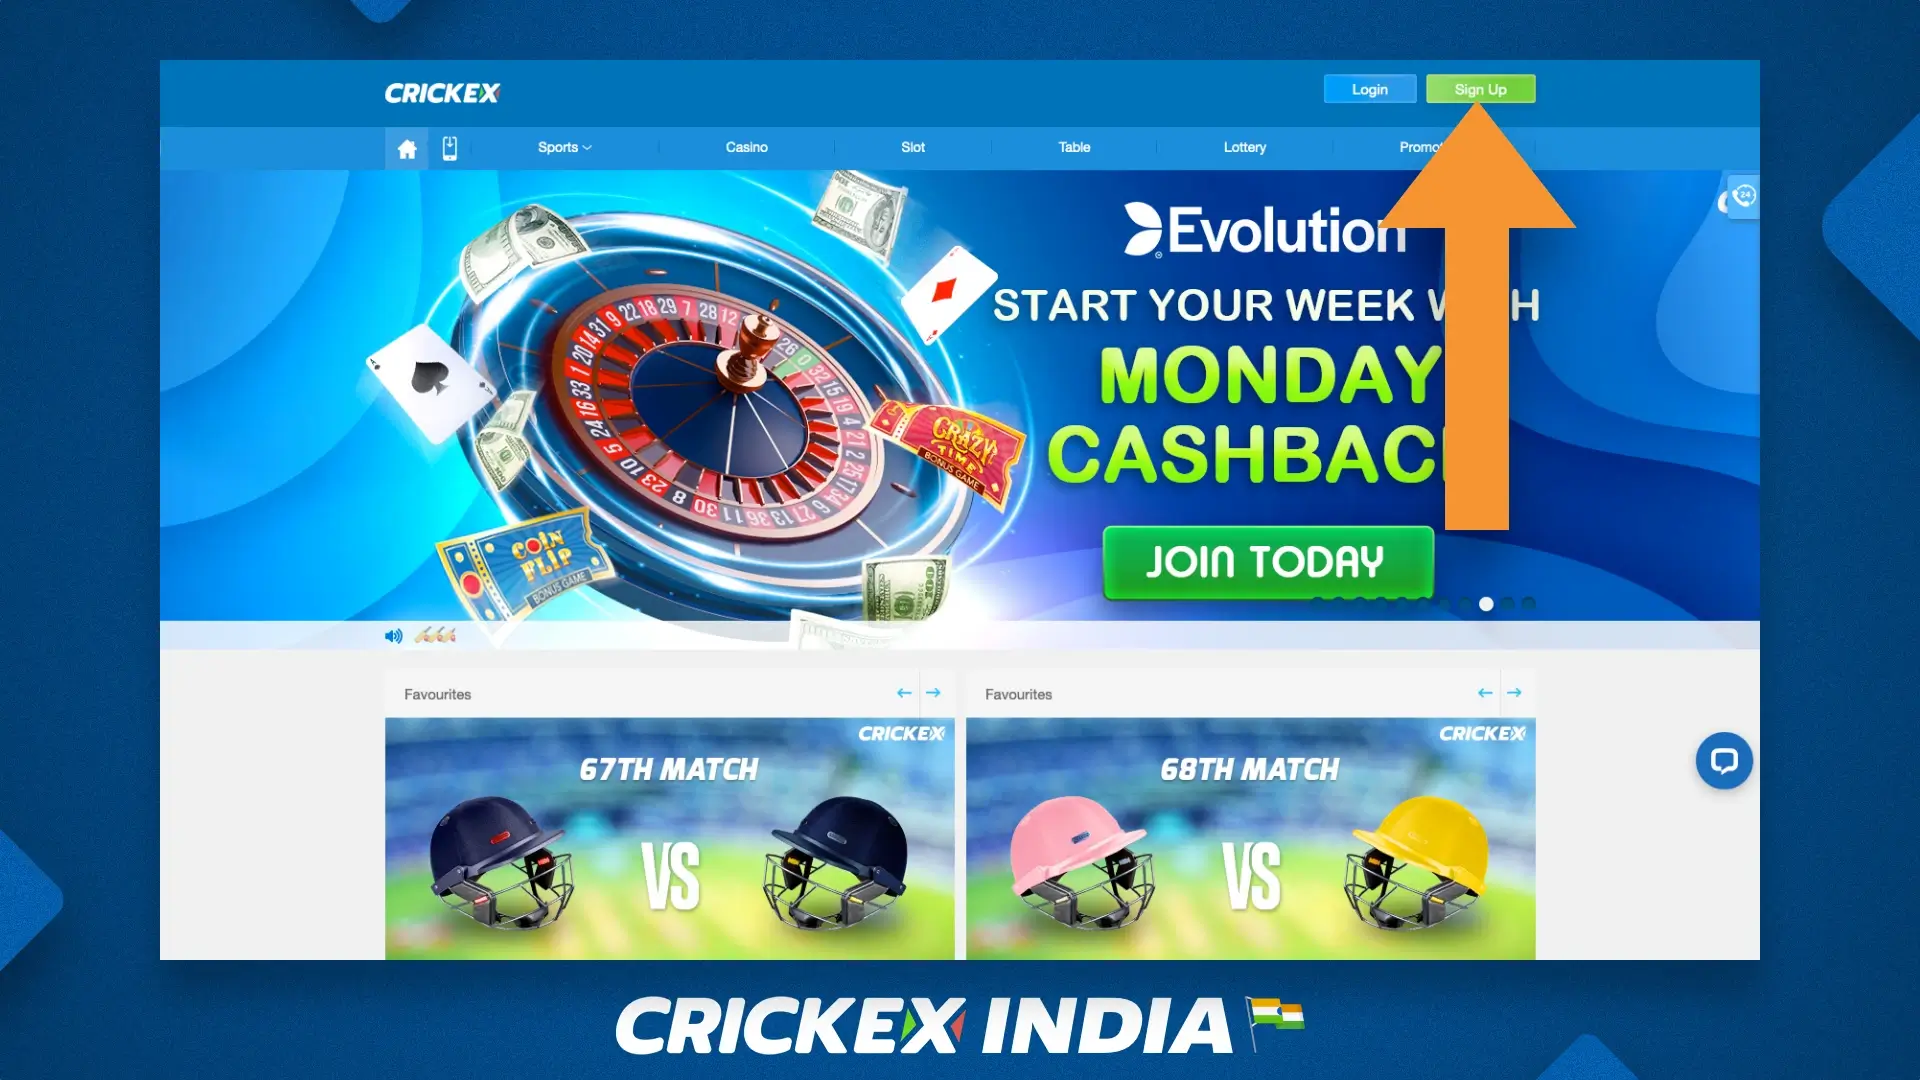 How to start playing in an Crickex online casino